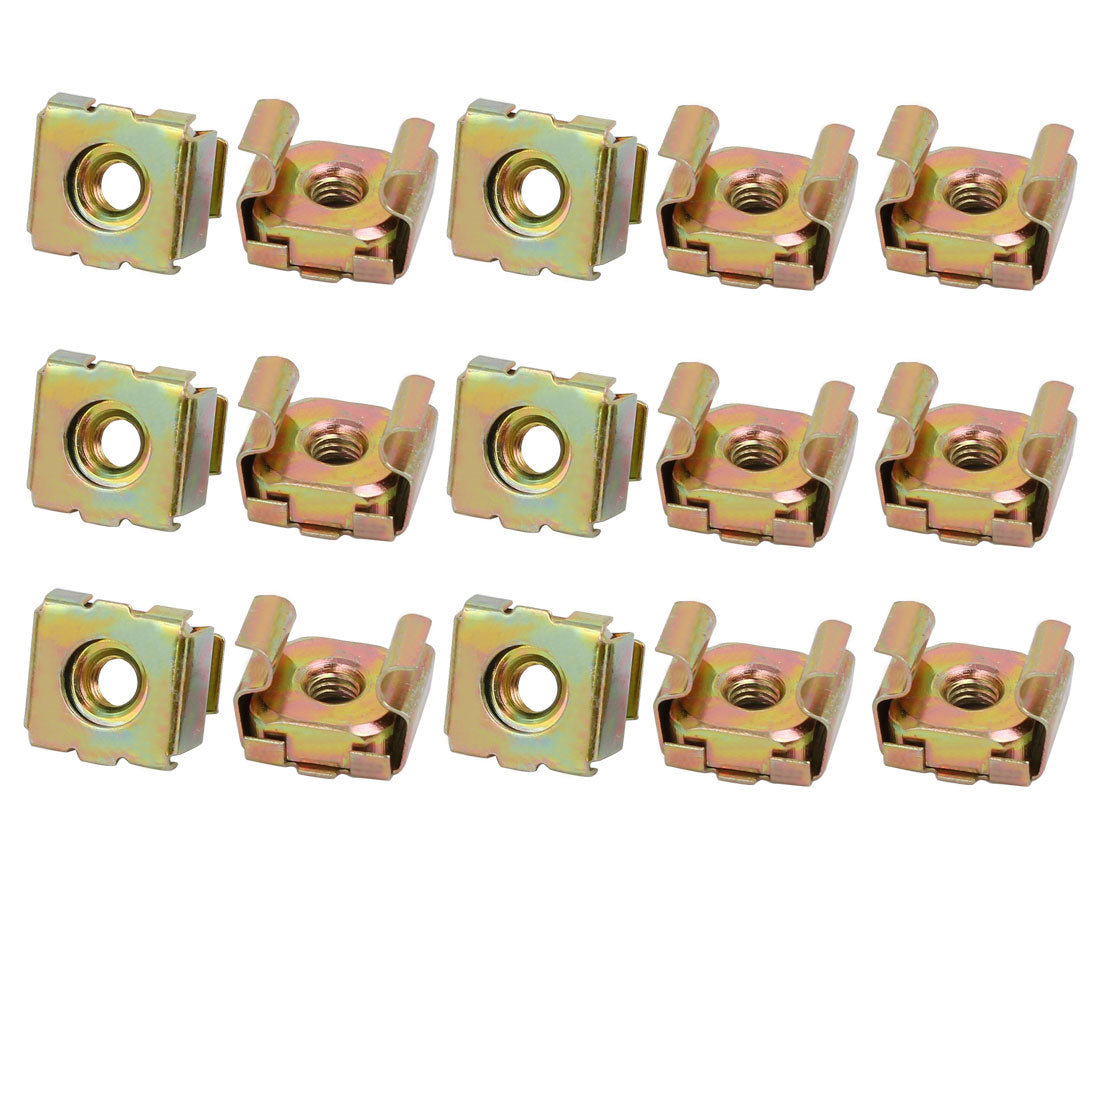 uxcell Uxcell 15pcs M4 Carbon Steel Captive Cage Nut Brass Tone for Server Shelf Cabinet